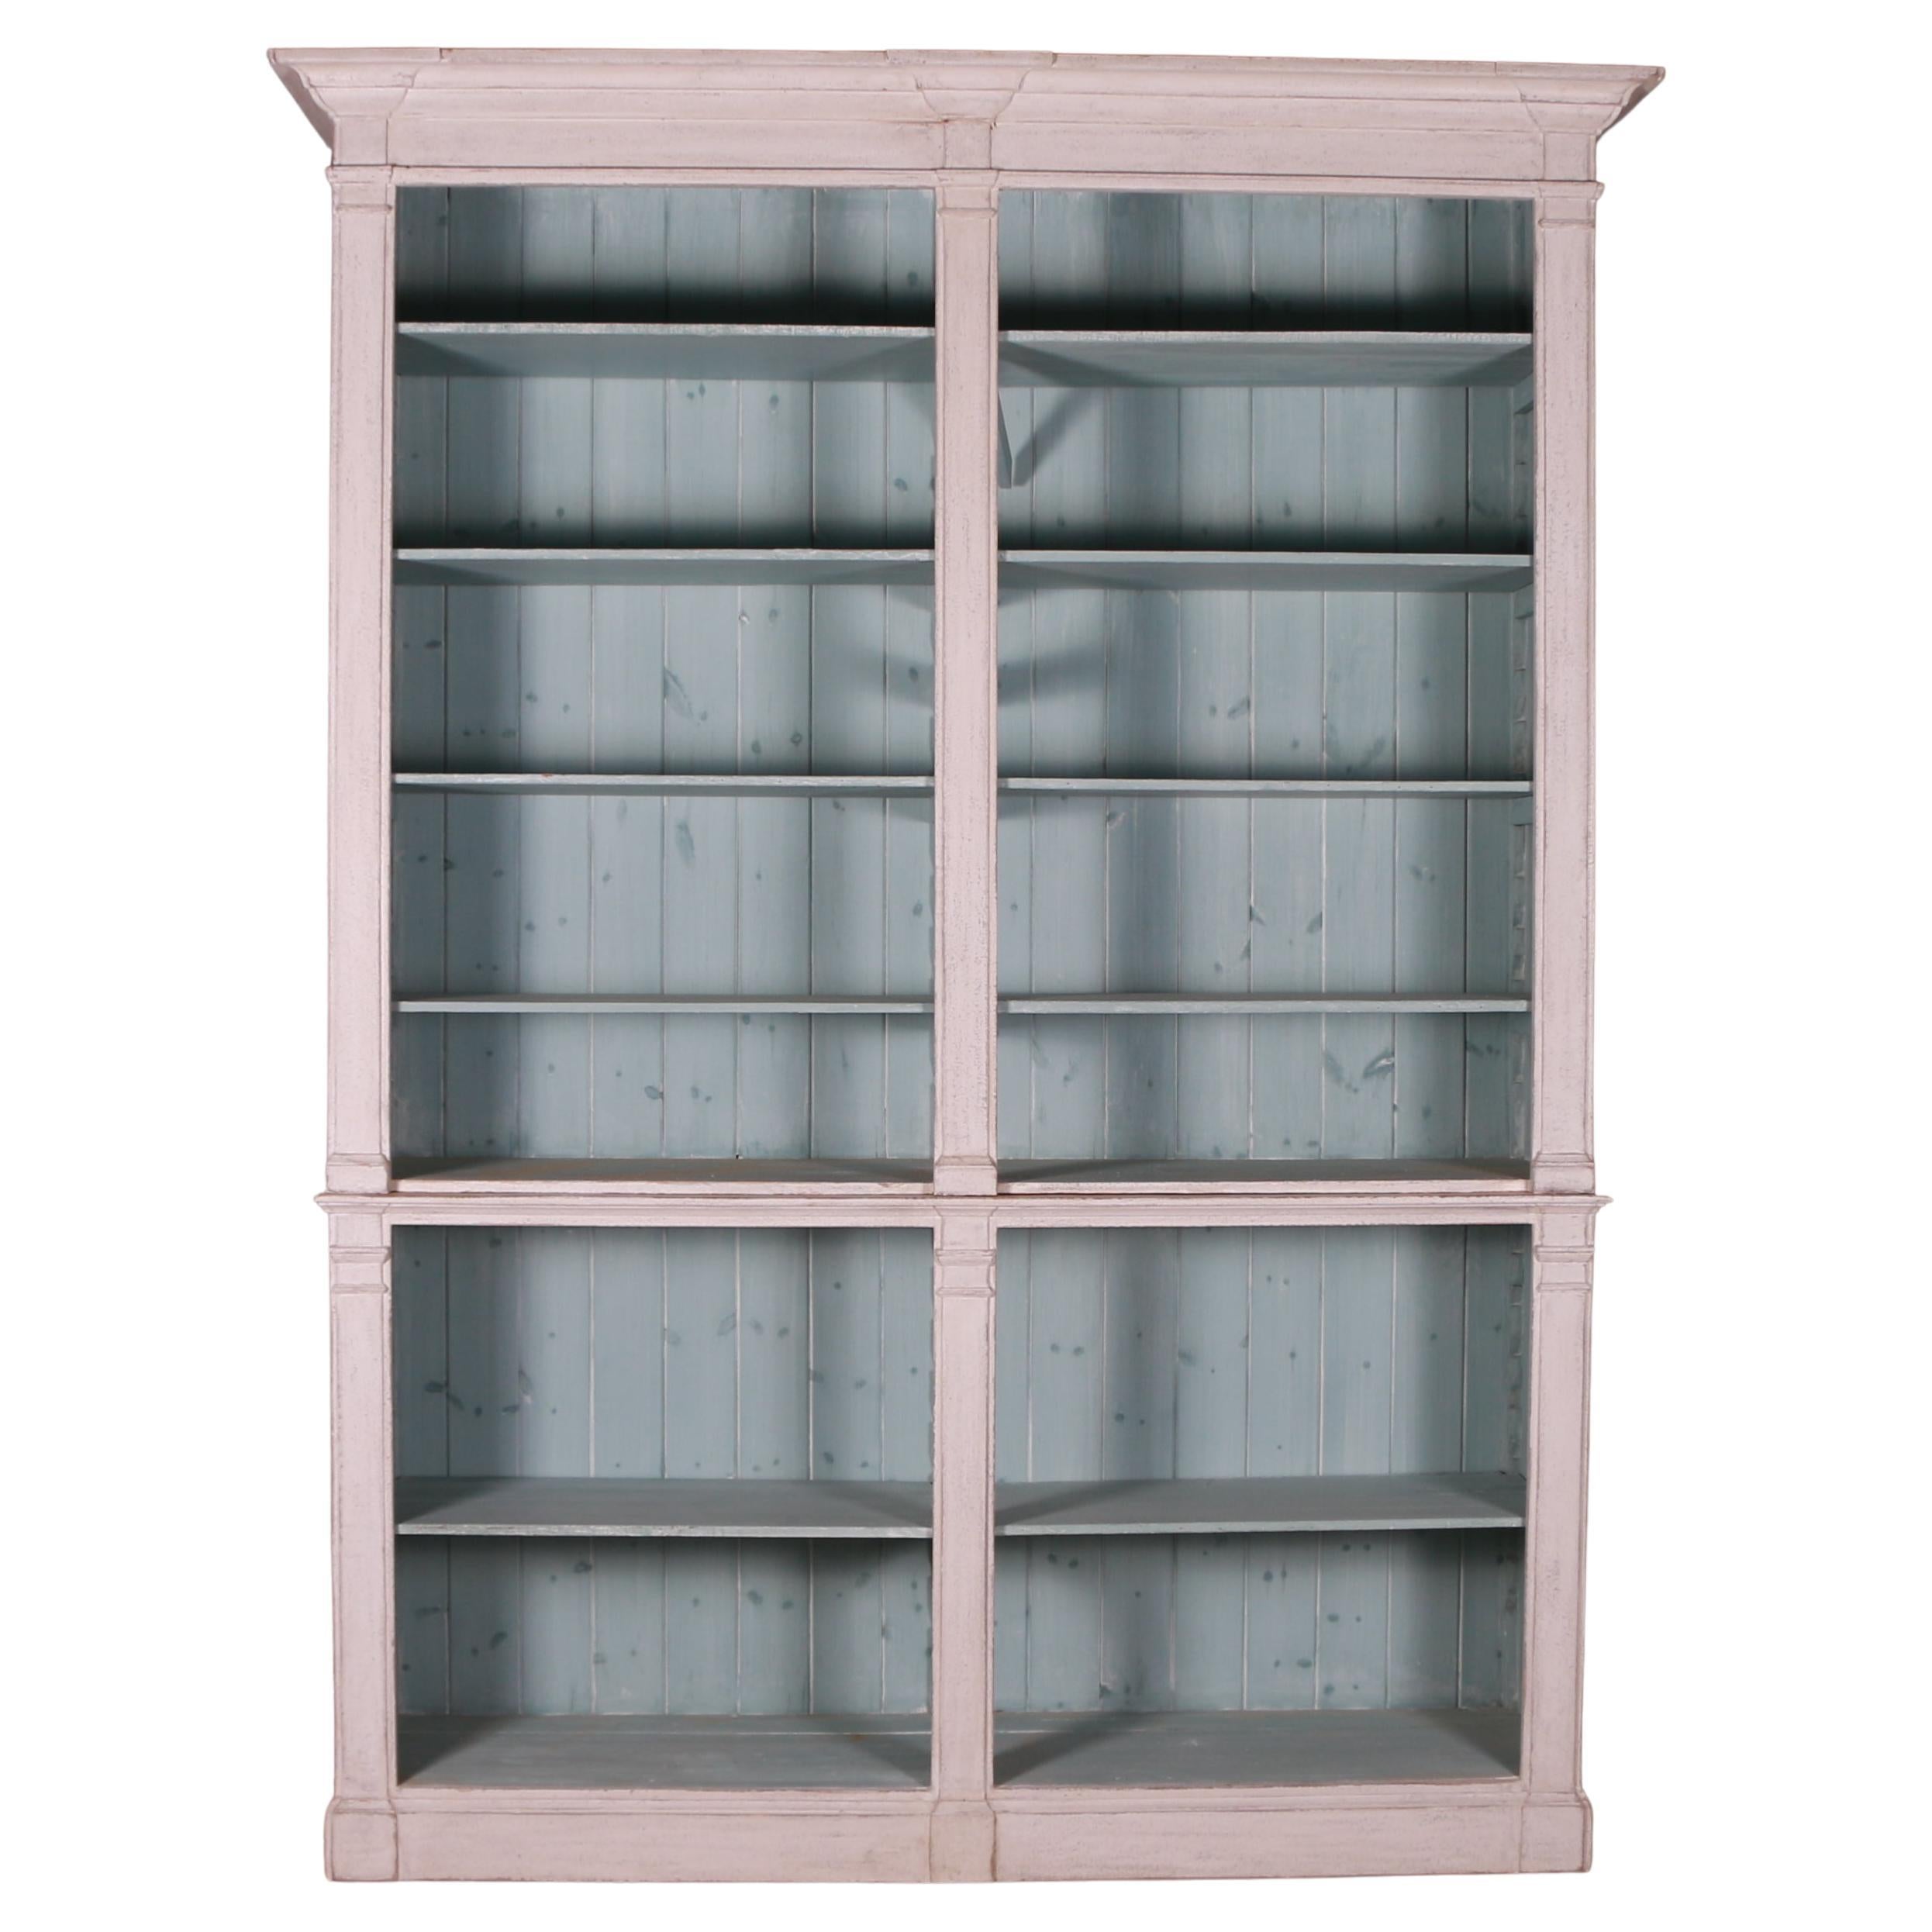 English Architectural Shop Fitting / Bookcase For Sale